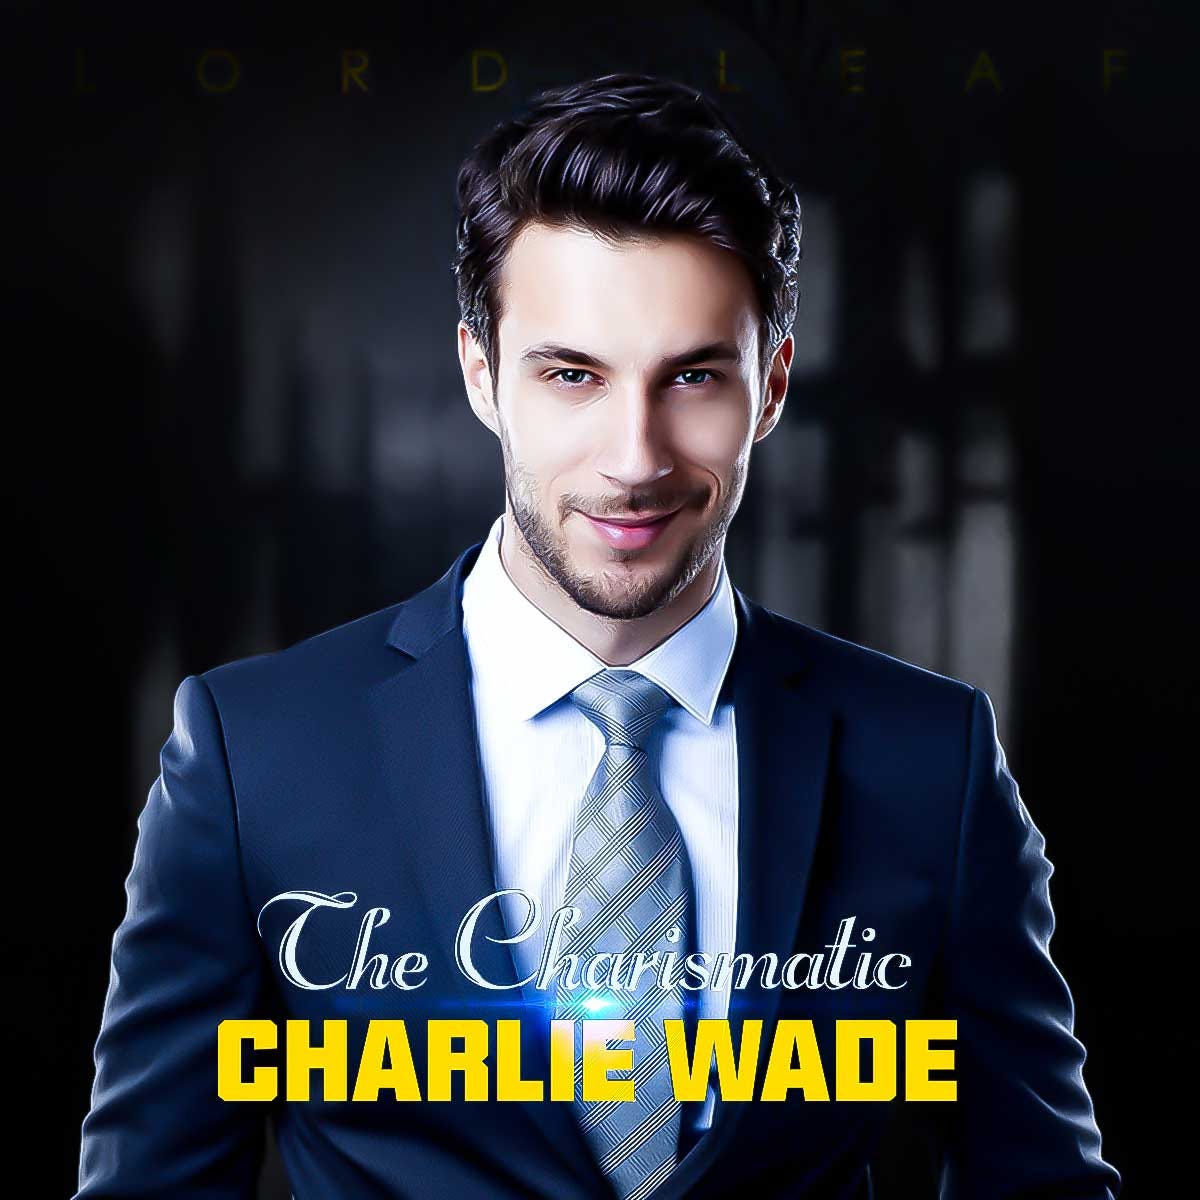 The Charismatic Charlie Wade Audiobook & Podcast Online by Lord Leaf -  Urban/Realistic Audiobooks - GoodFM